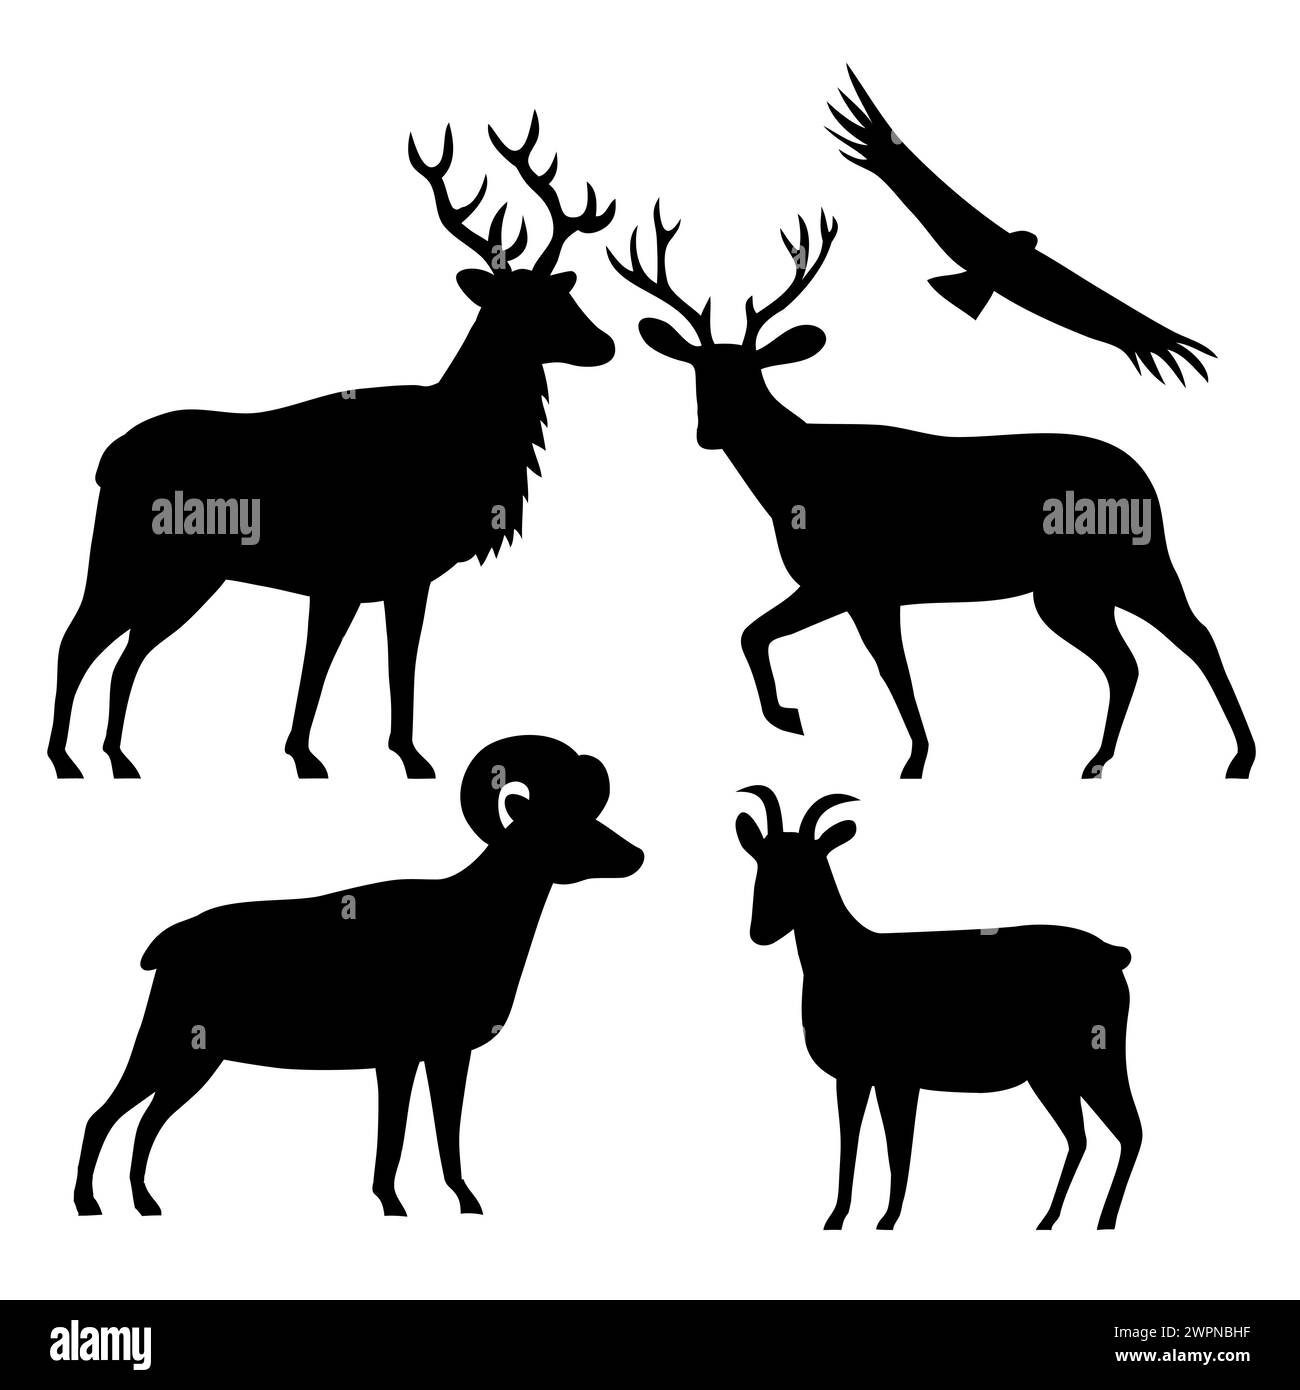 Stencil illustration of silhouette of American wildlife of an elk or wapiti, mule deer, male and female bighorn sheep and California condor on isolate Stock Photo